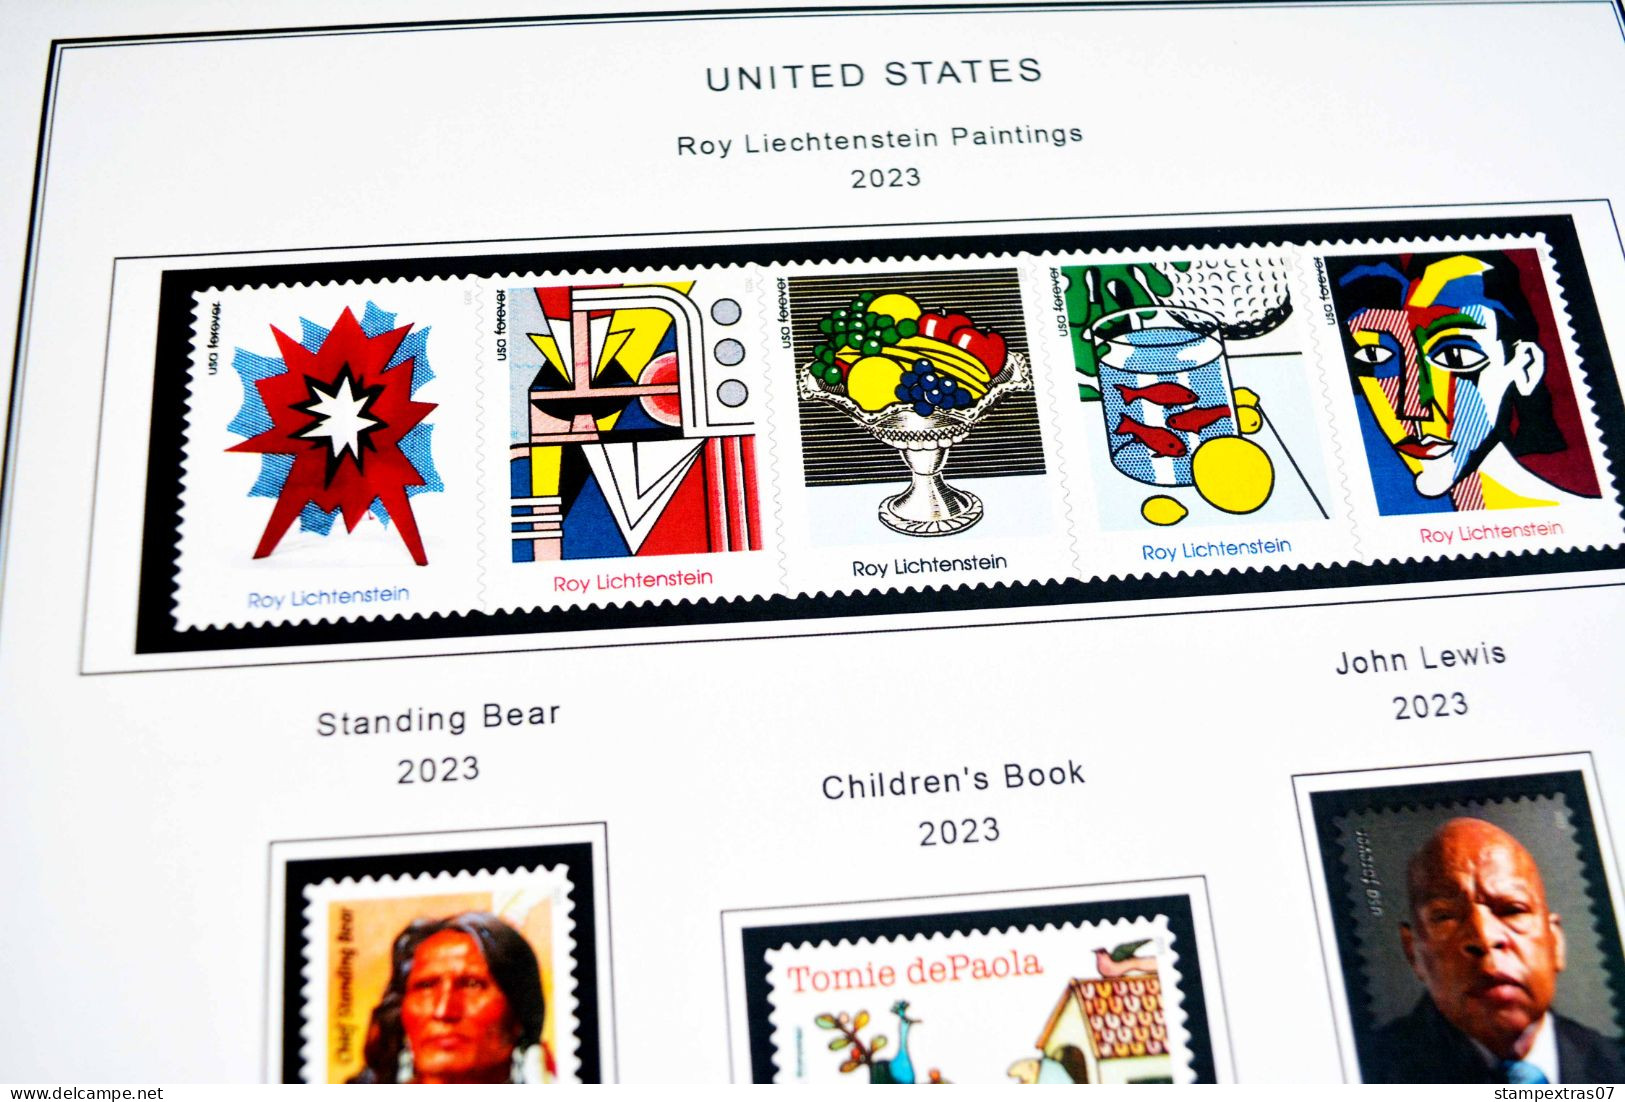 COLOR PRINTED USA 2021-2023 STAMP ALBUM PAGES (34 illustrated pages) >> FEUILLES ALBUM